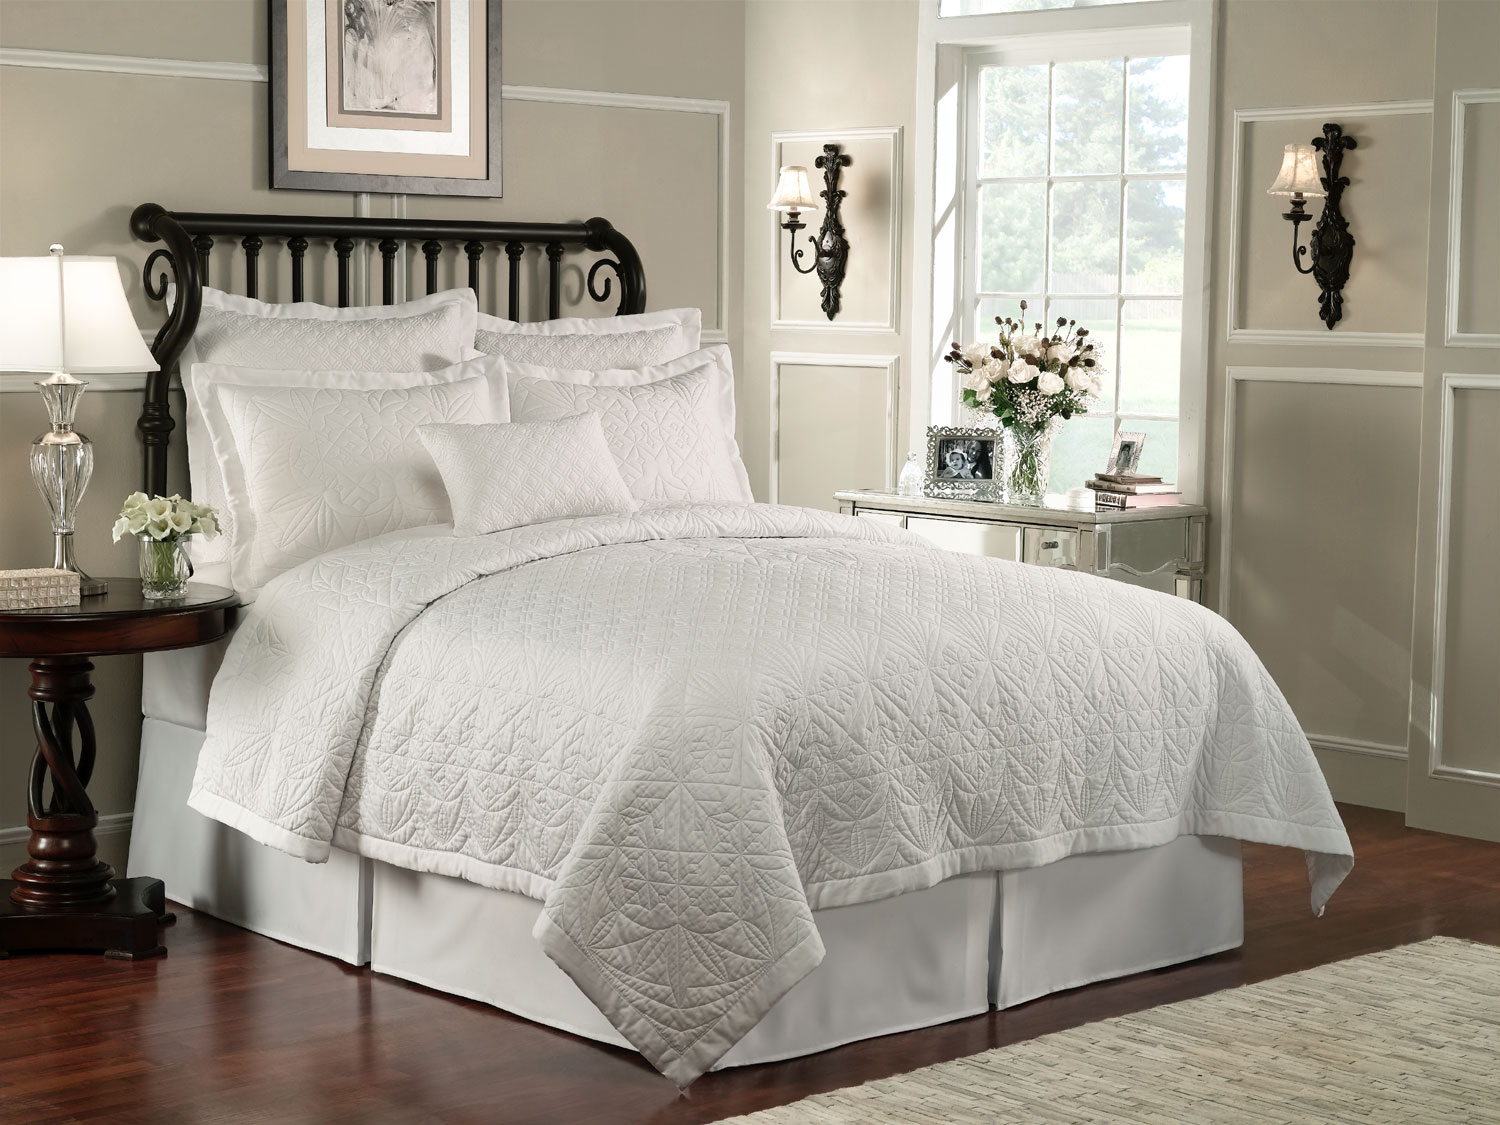 Lismore Quilt White by Waterford Luxury Bedding  